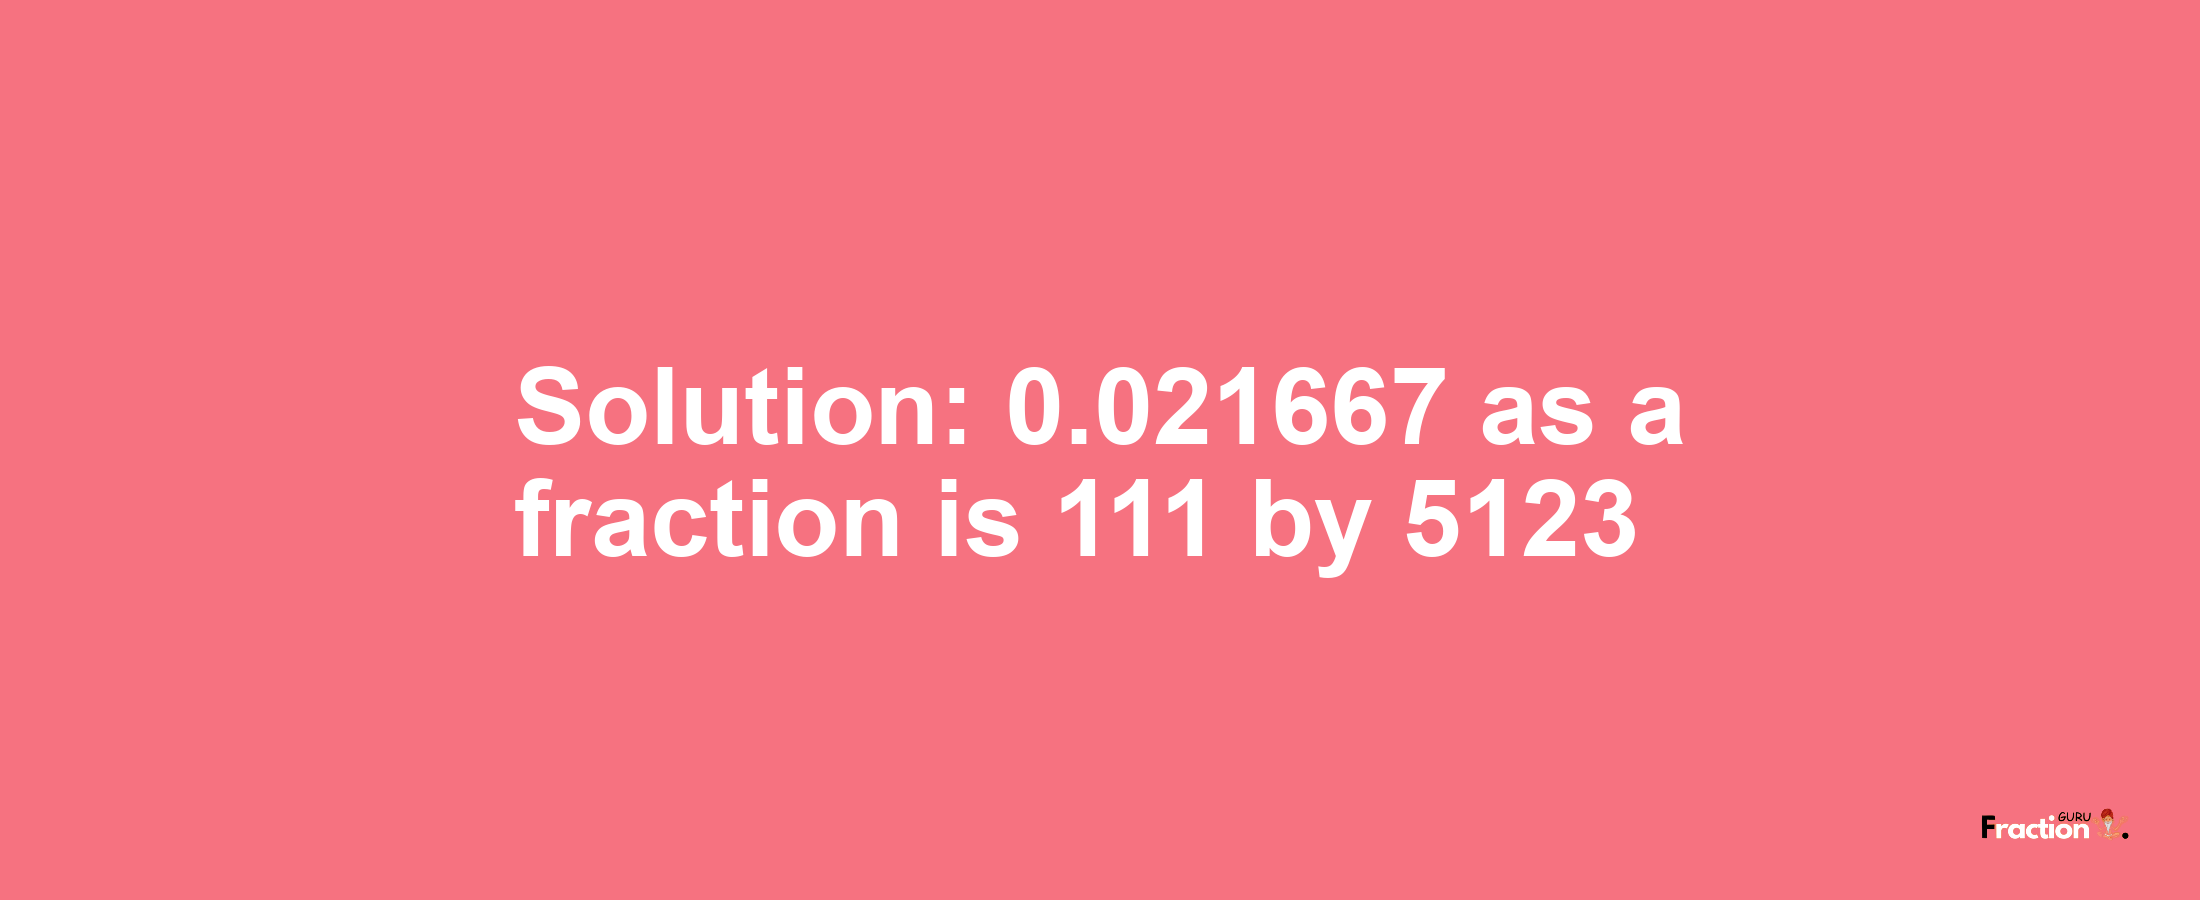 Solution:0.021667 as a fraction is 111/5123